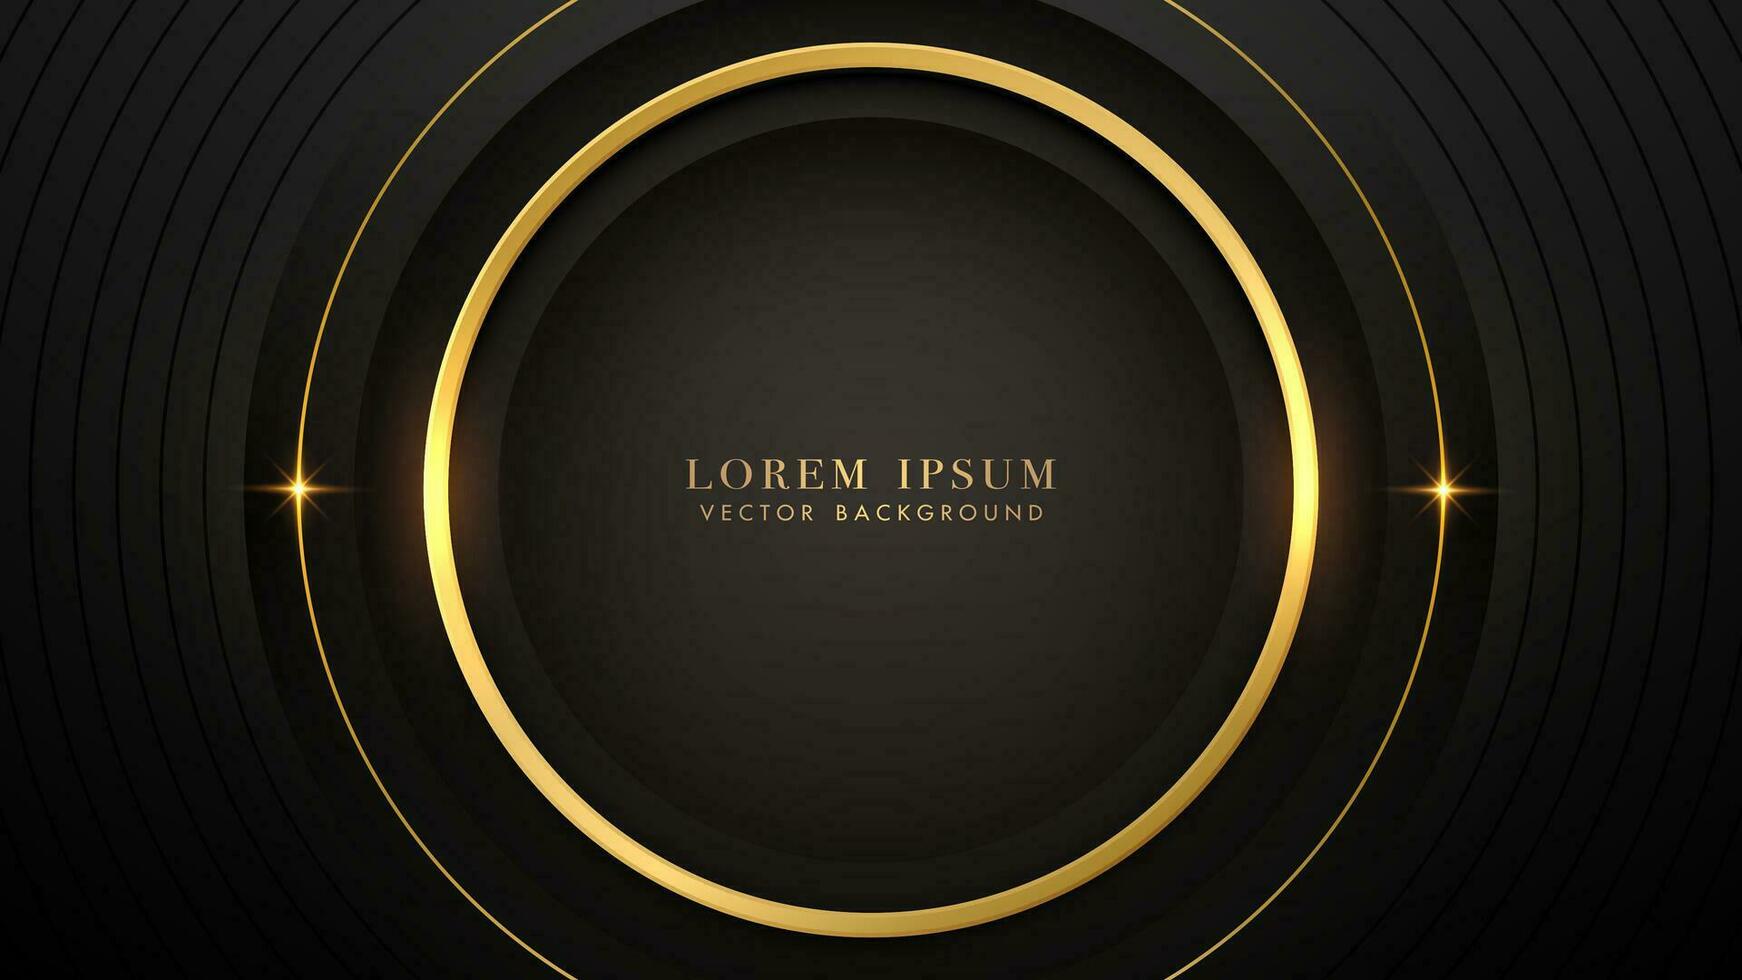 Abstract golden ring and gold circle frame elements with light effect decoration on black background vector